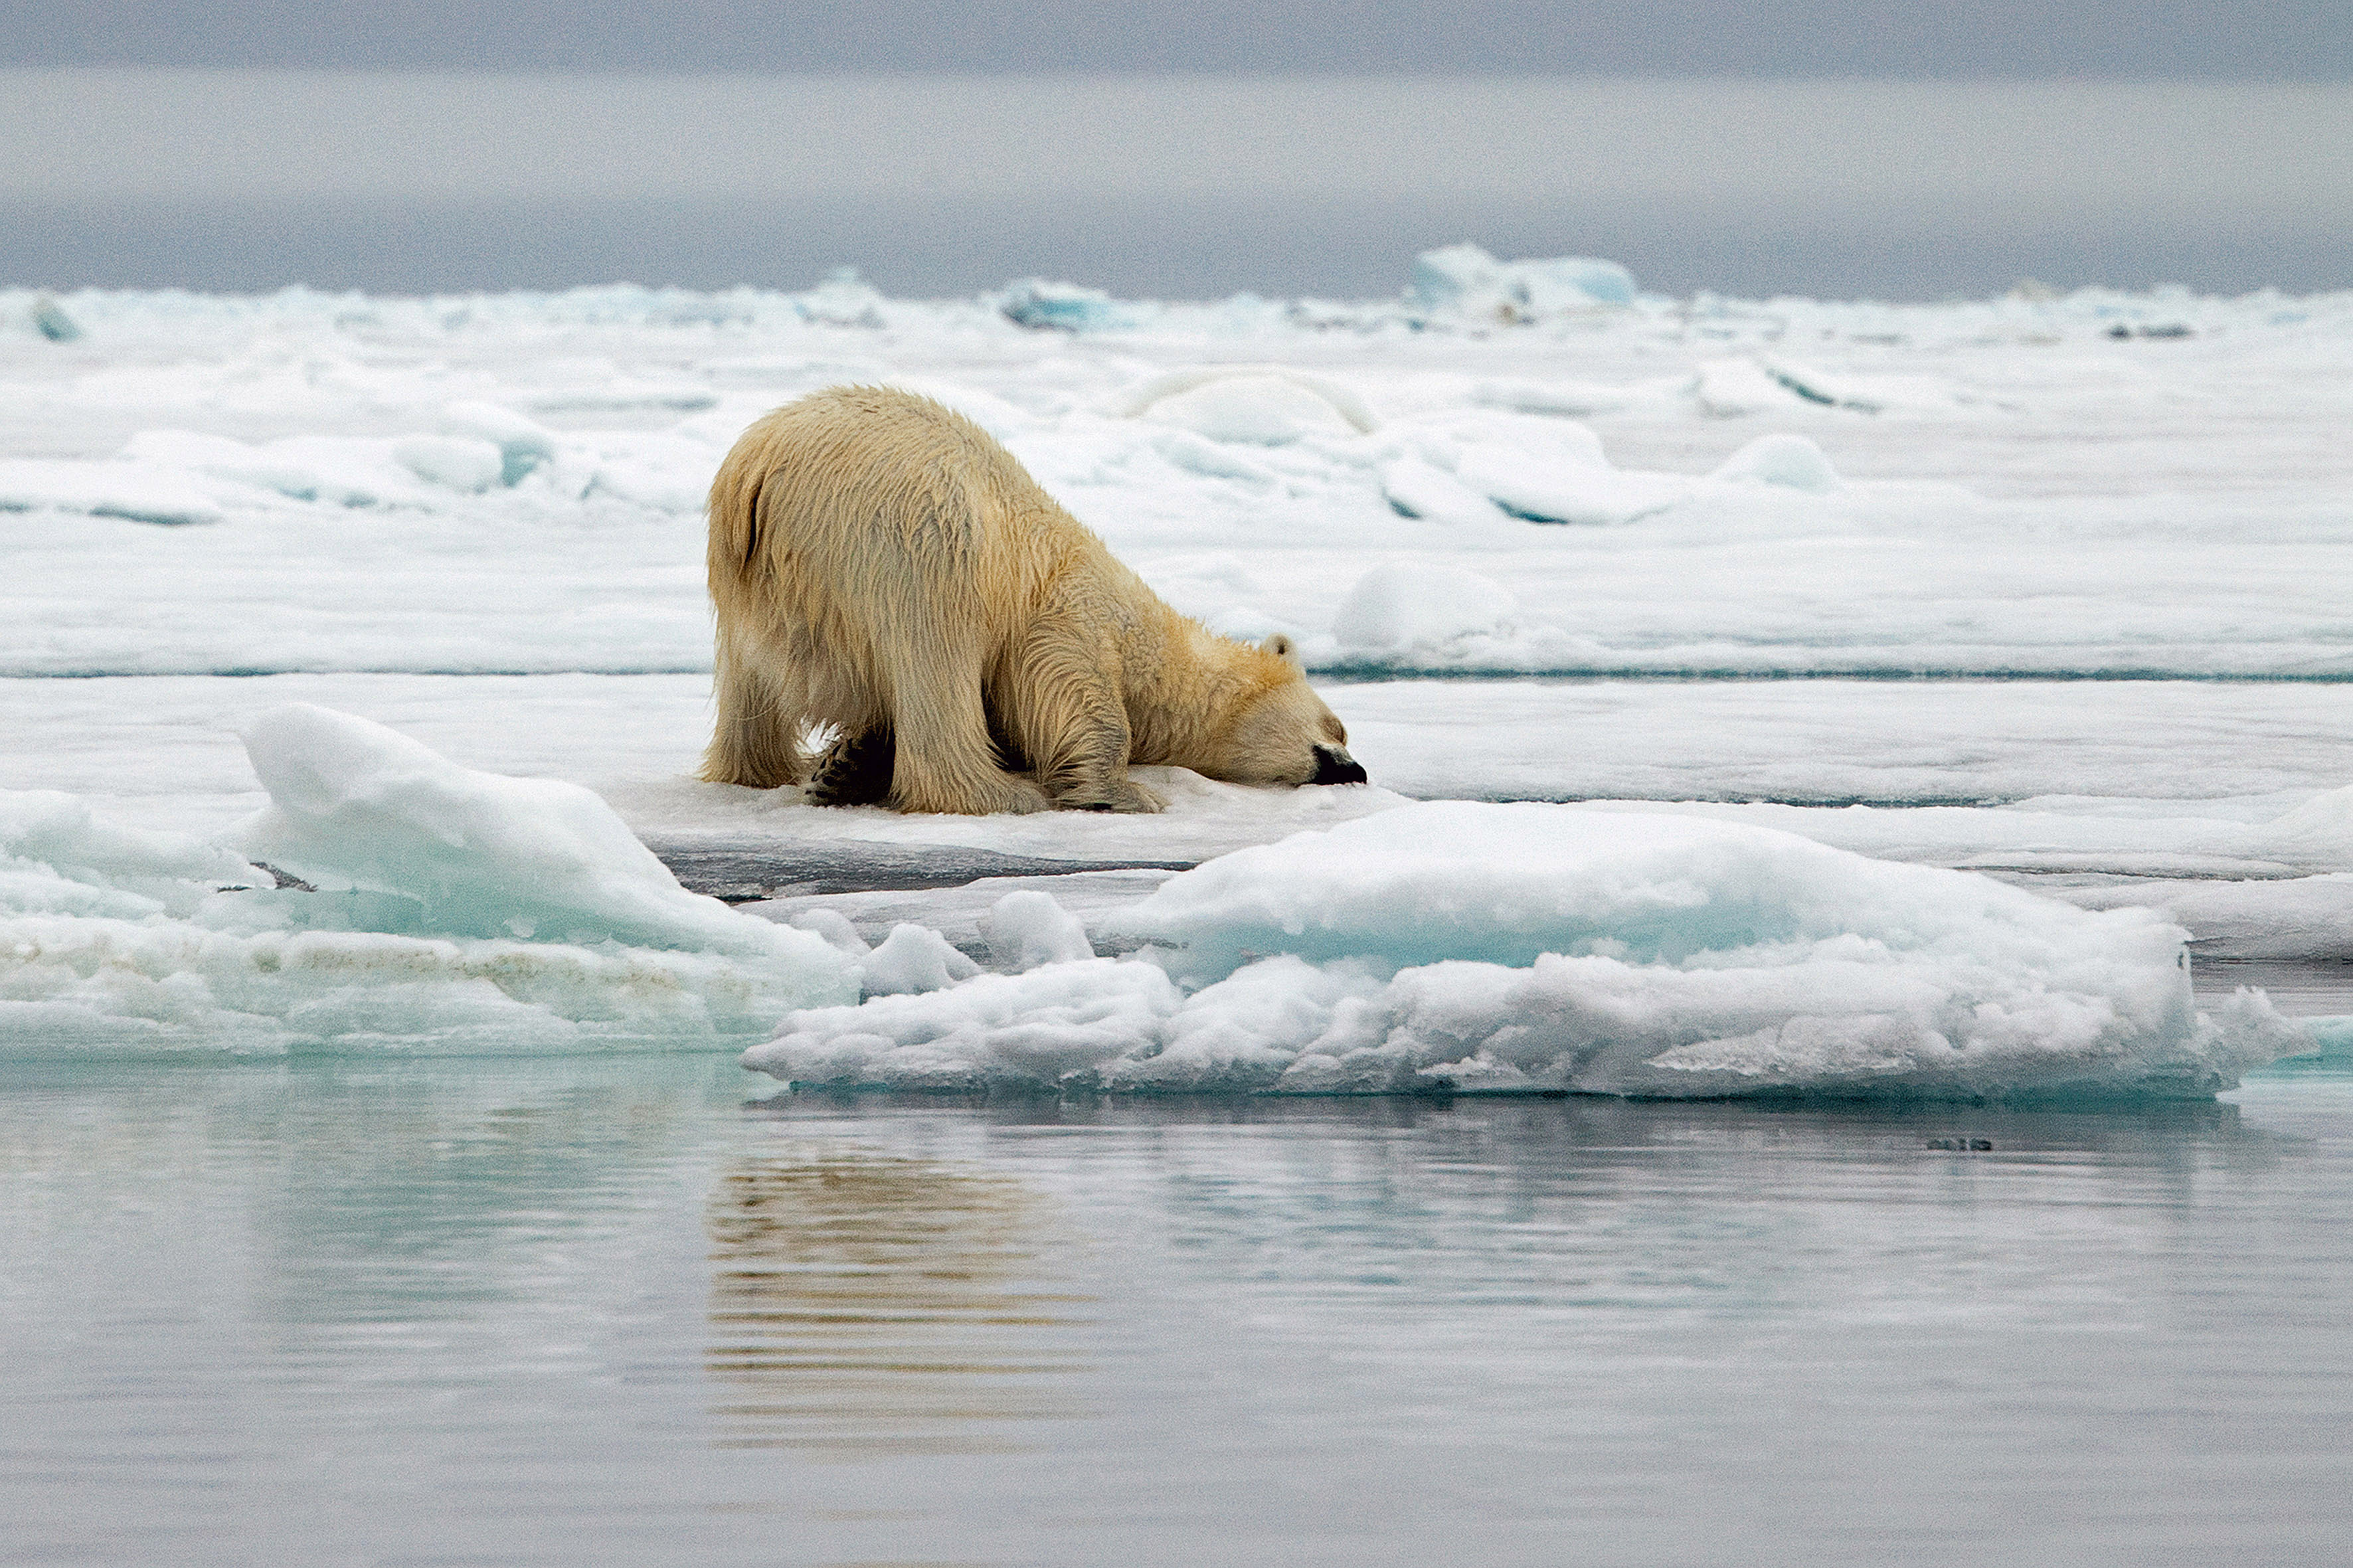 Melting away: The slow, steady death of the polar ice caps | 5 | New ...